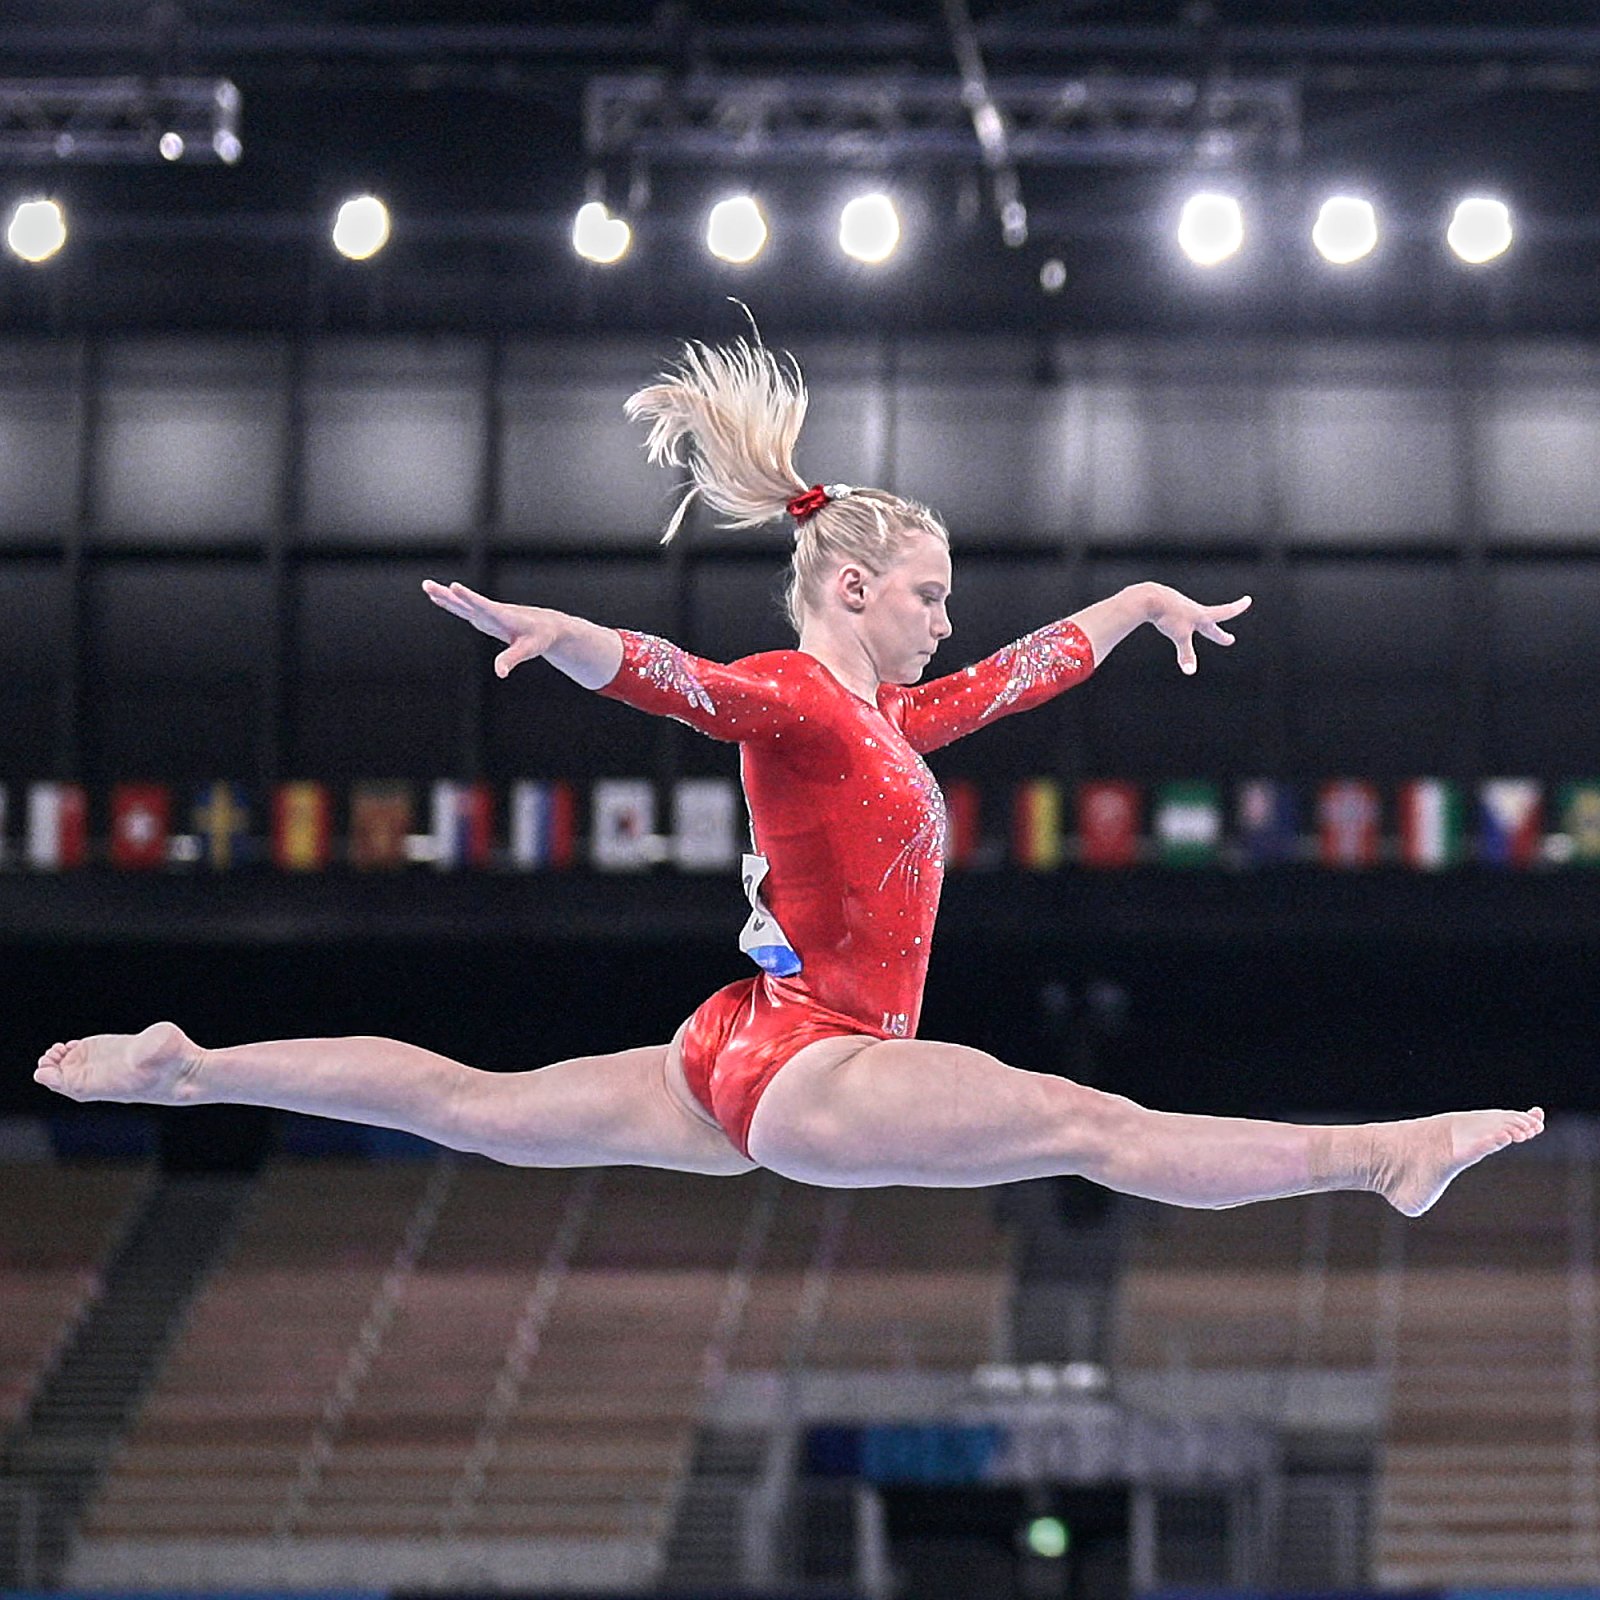 Team USA's Jade Carey 5 Things to Know About the Gymnast